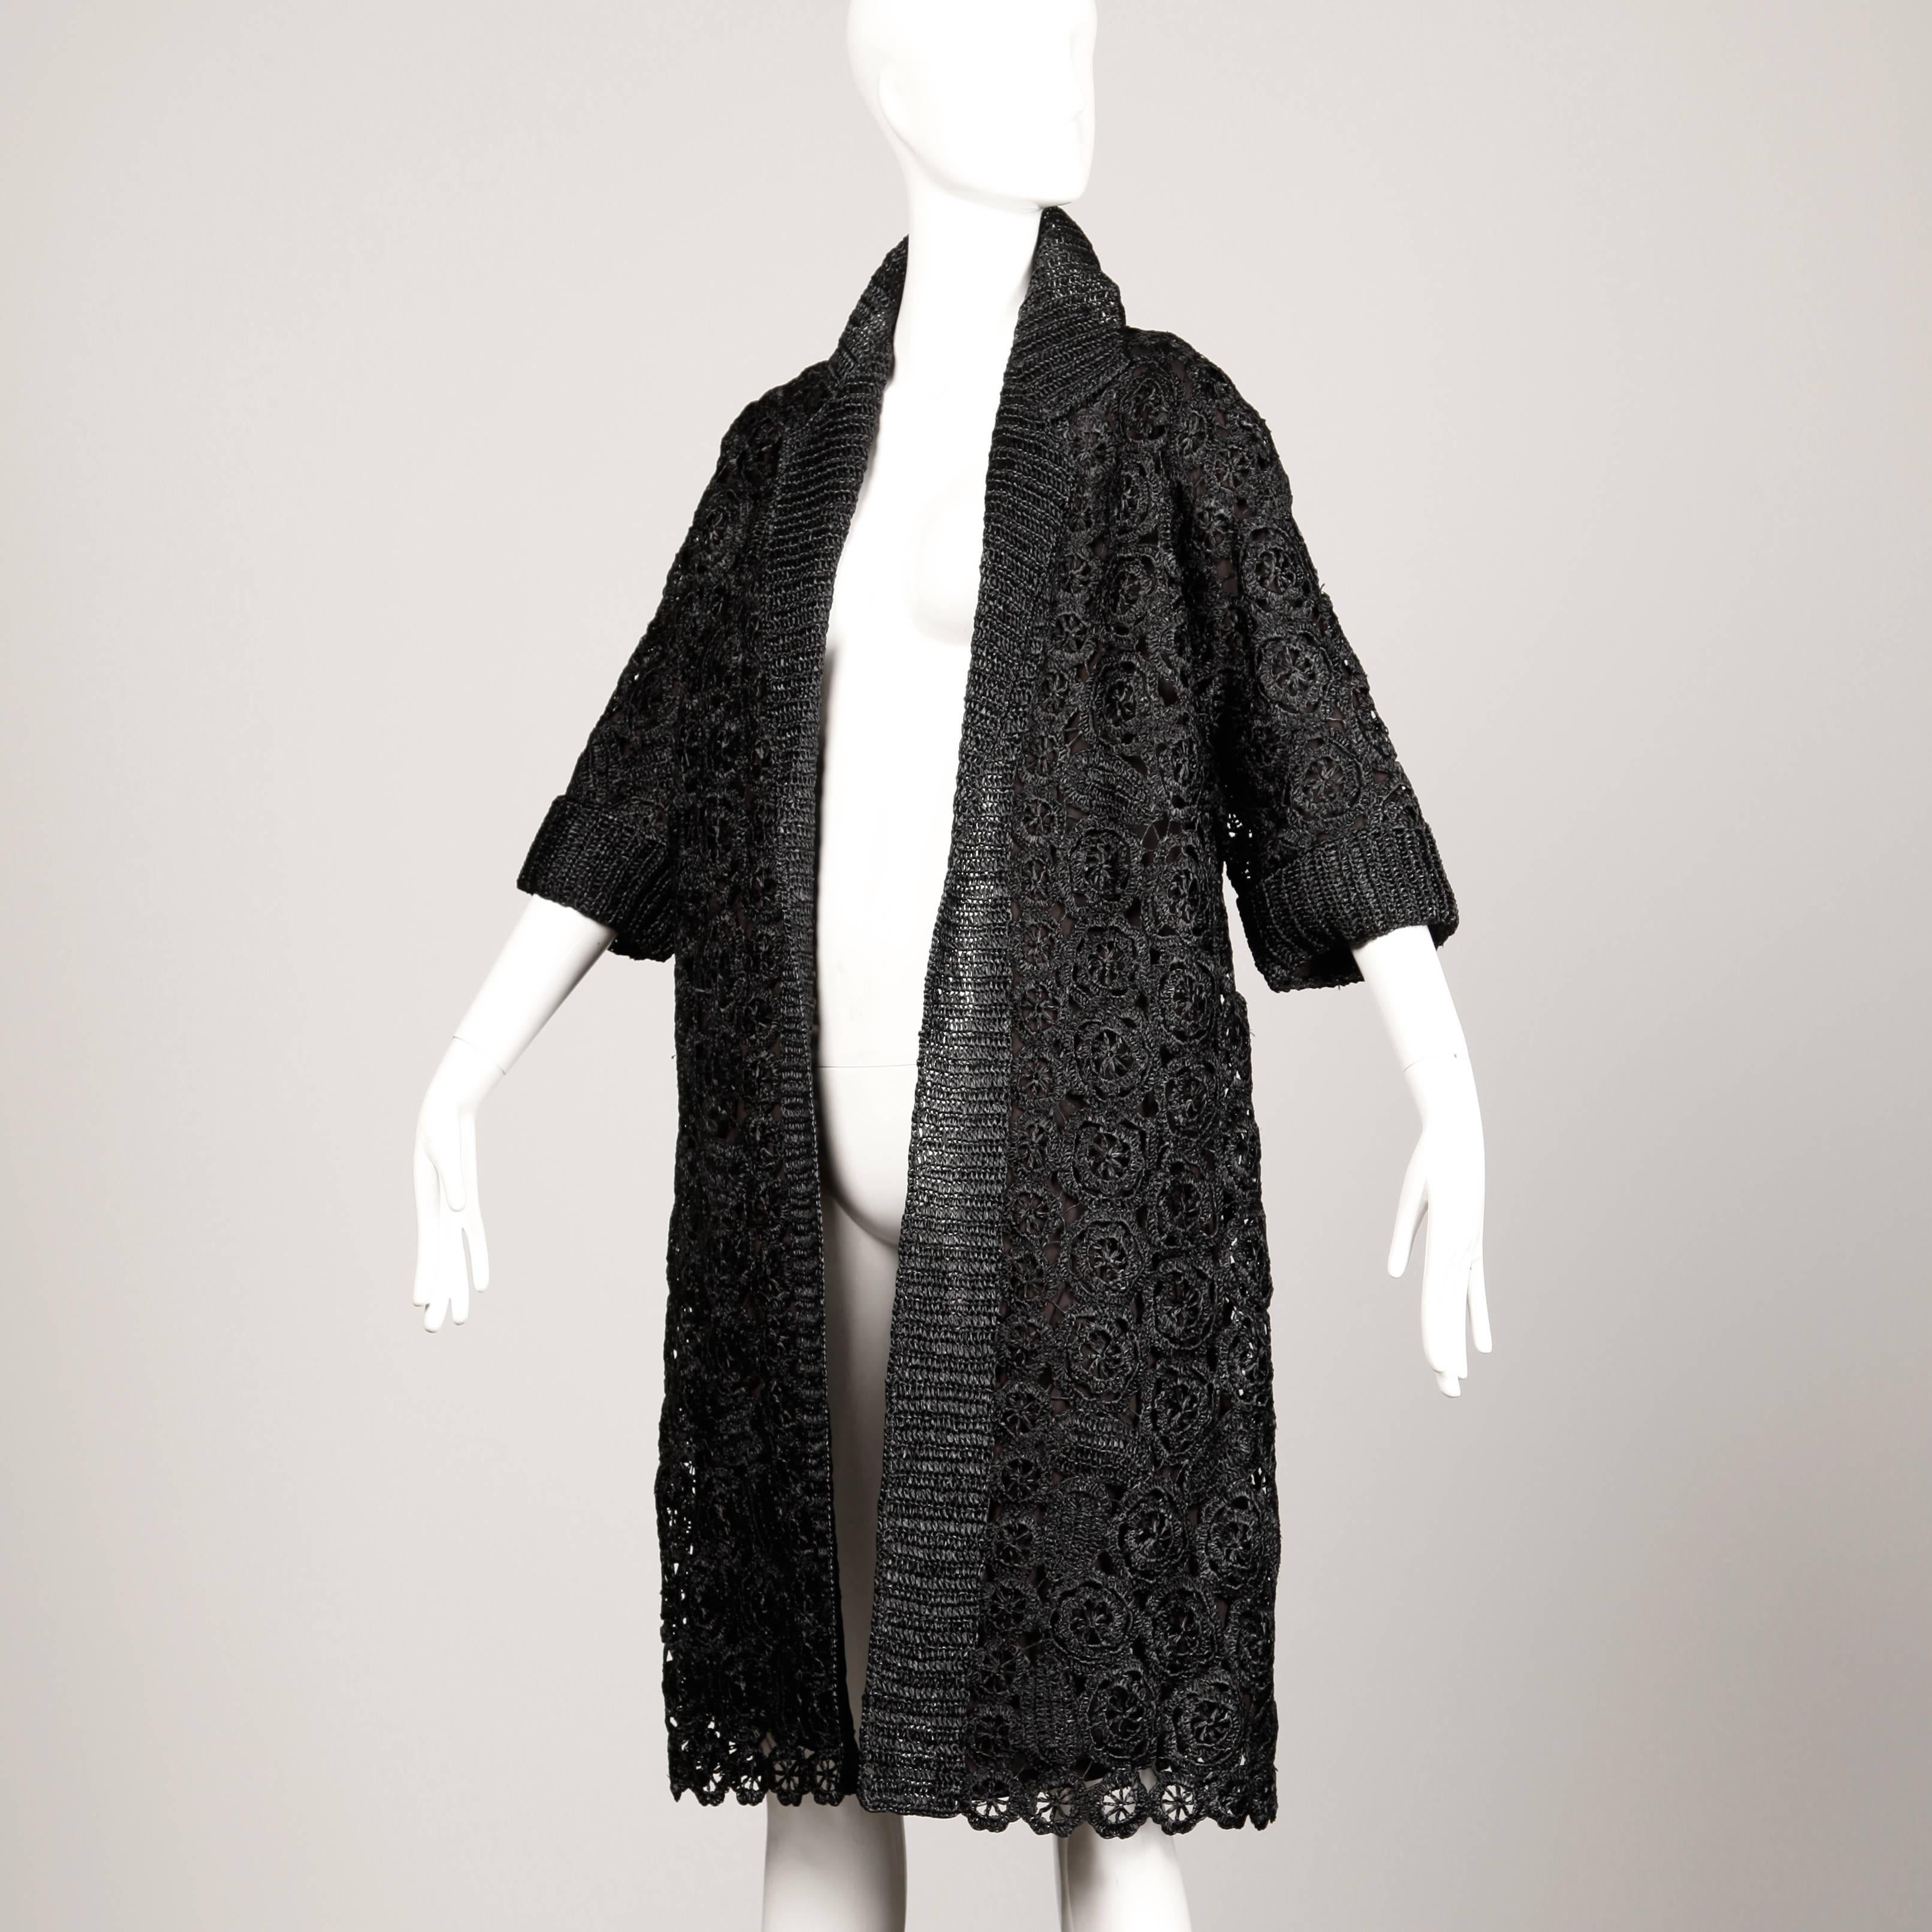 Incredible 1960s vintage black raffia coat with a scalloped lace edge. Fully lined with no closure (hangs open. Made in Italy. The marked size is a vintage Italian 48. The coat fits like a modern size small-large on account of its free shape. The